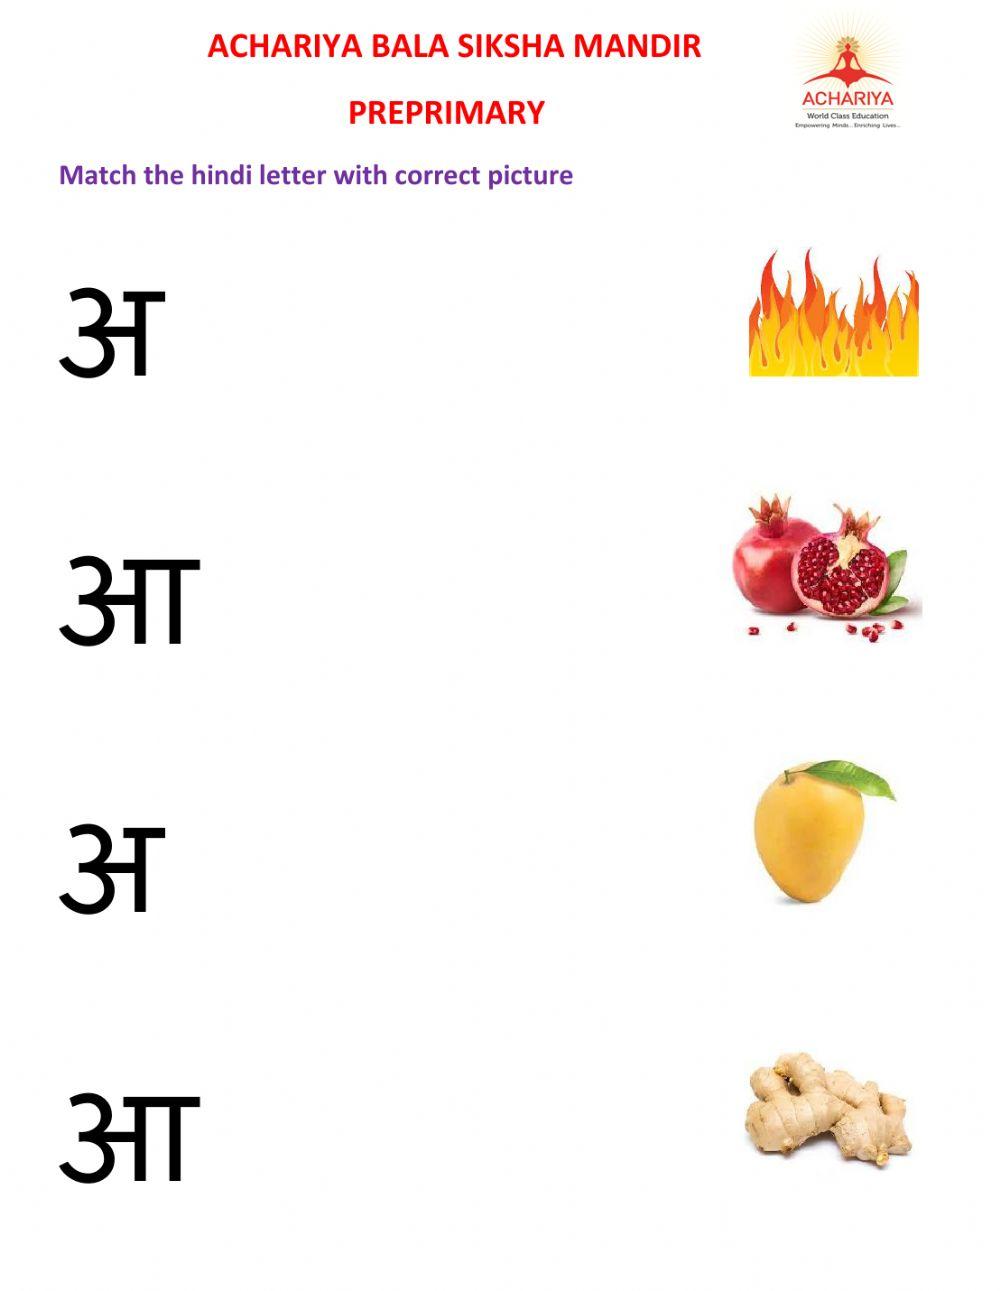 Match the hindi letter with correct picture